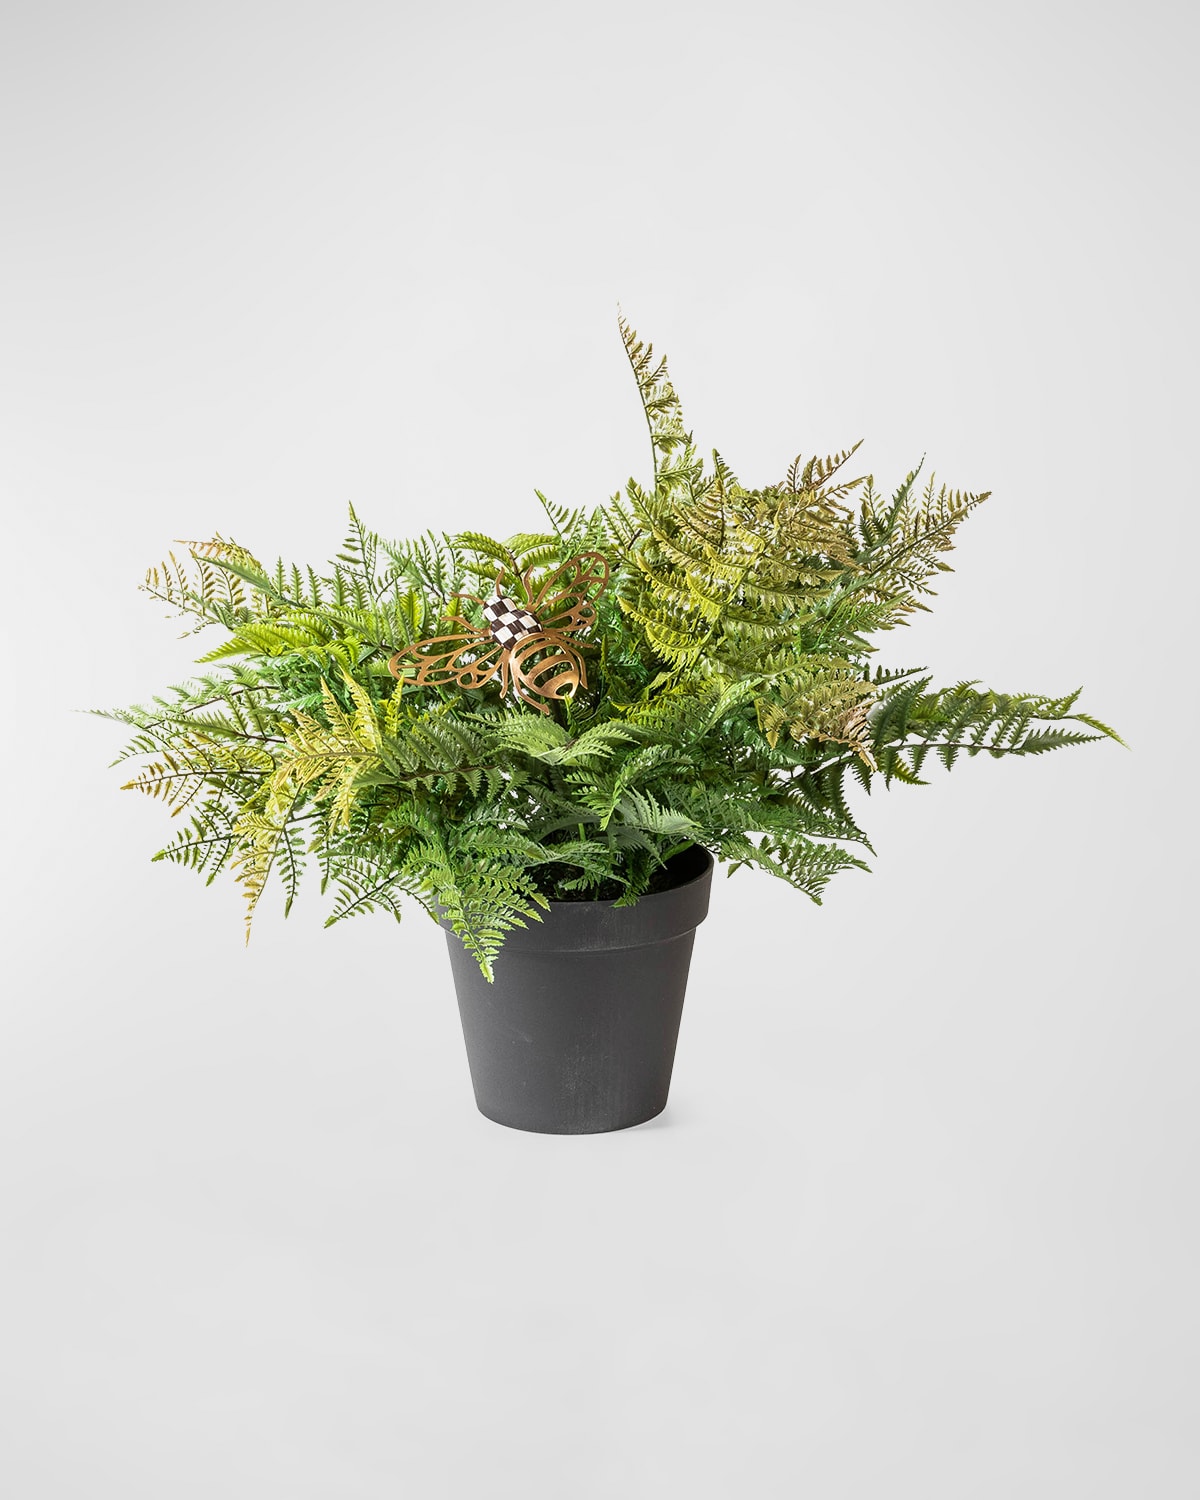 Mackenzie-childs 26" Potted Fern With Bee In Black